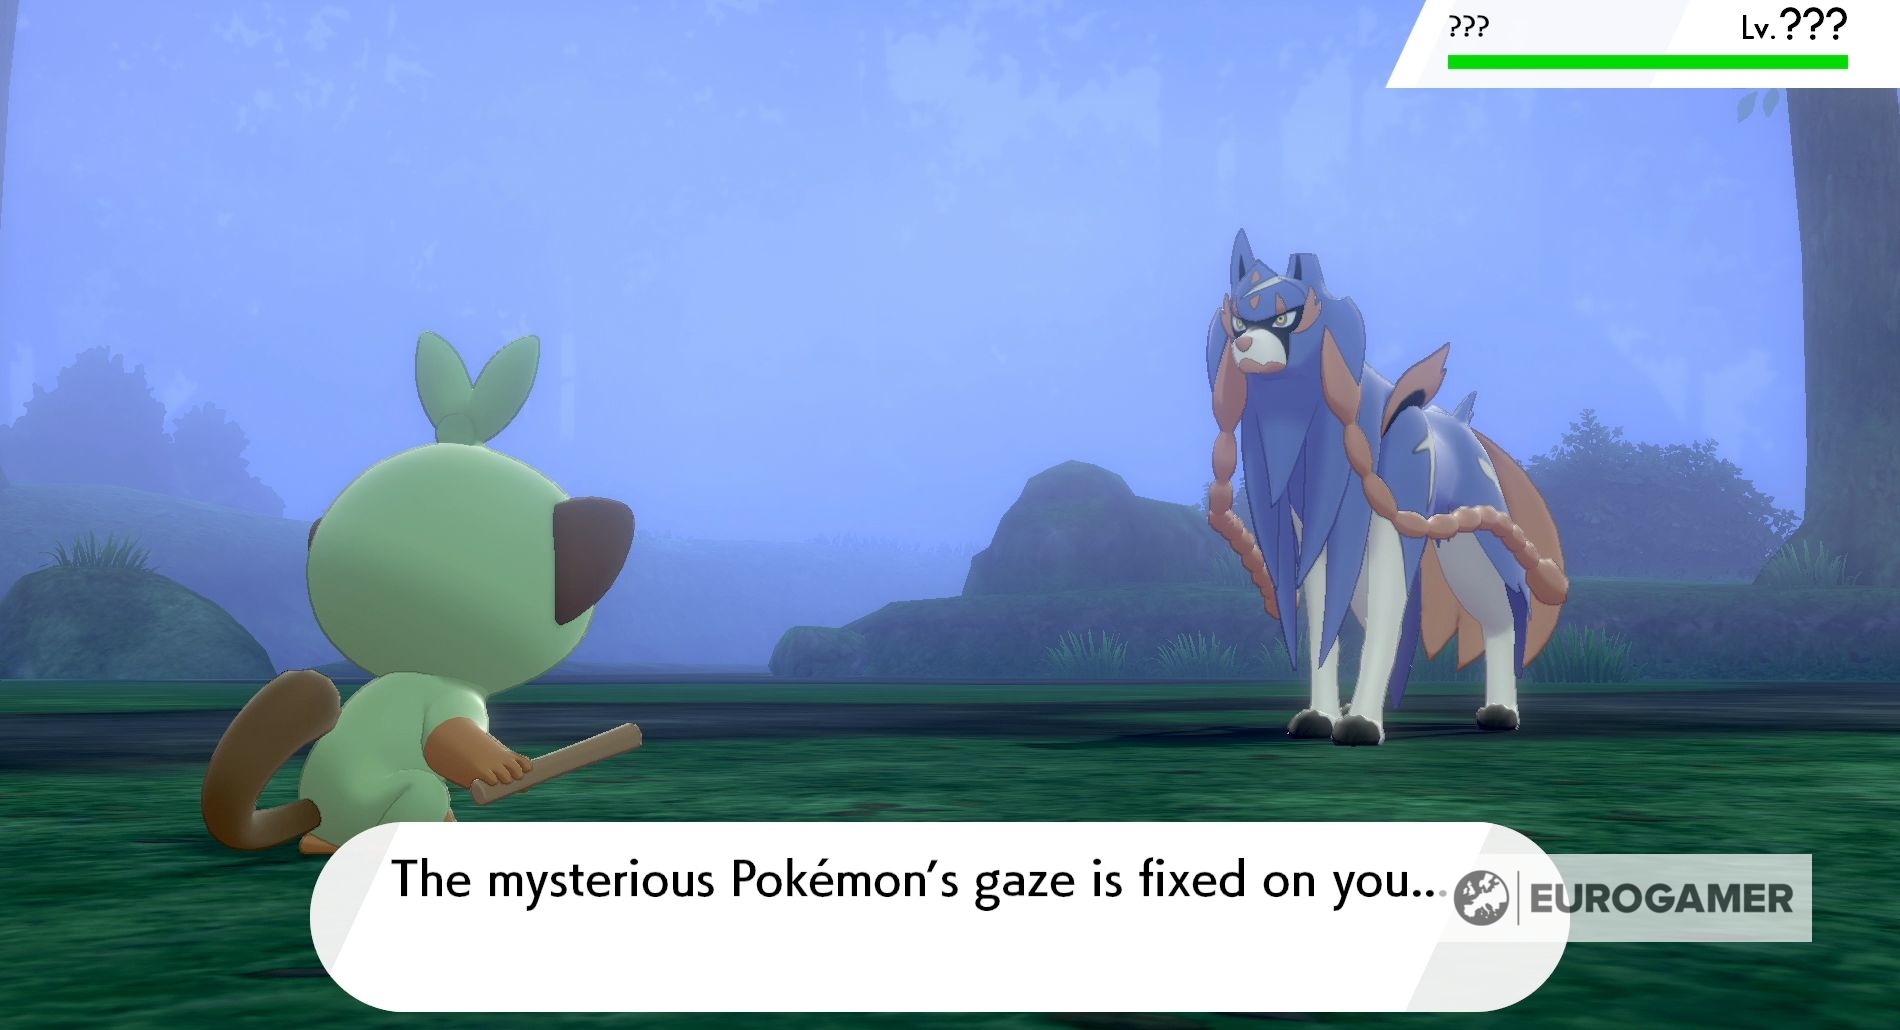 Pokémon Sword and Shield  Pokémon explained What is the mysterious Pokémon in the early game